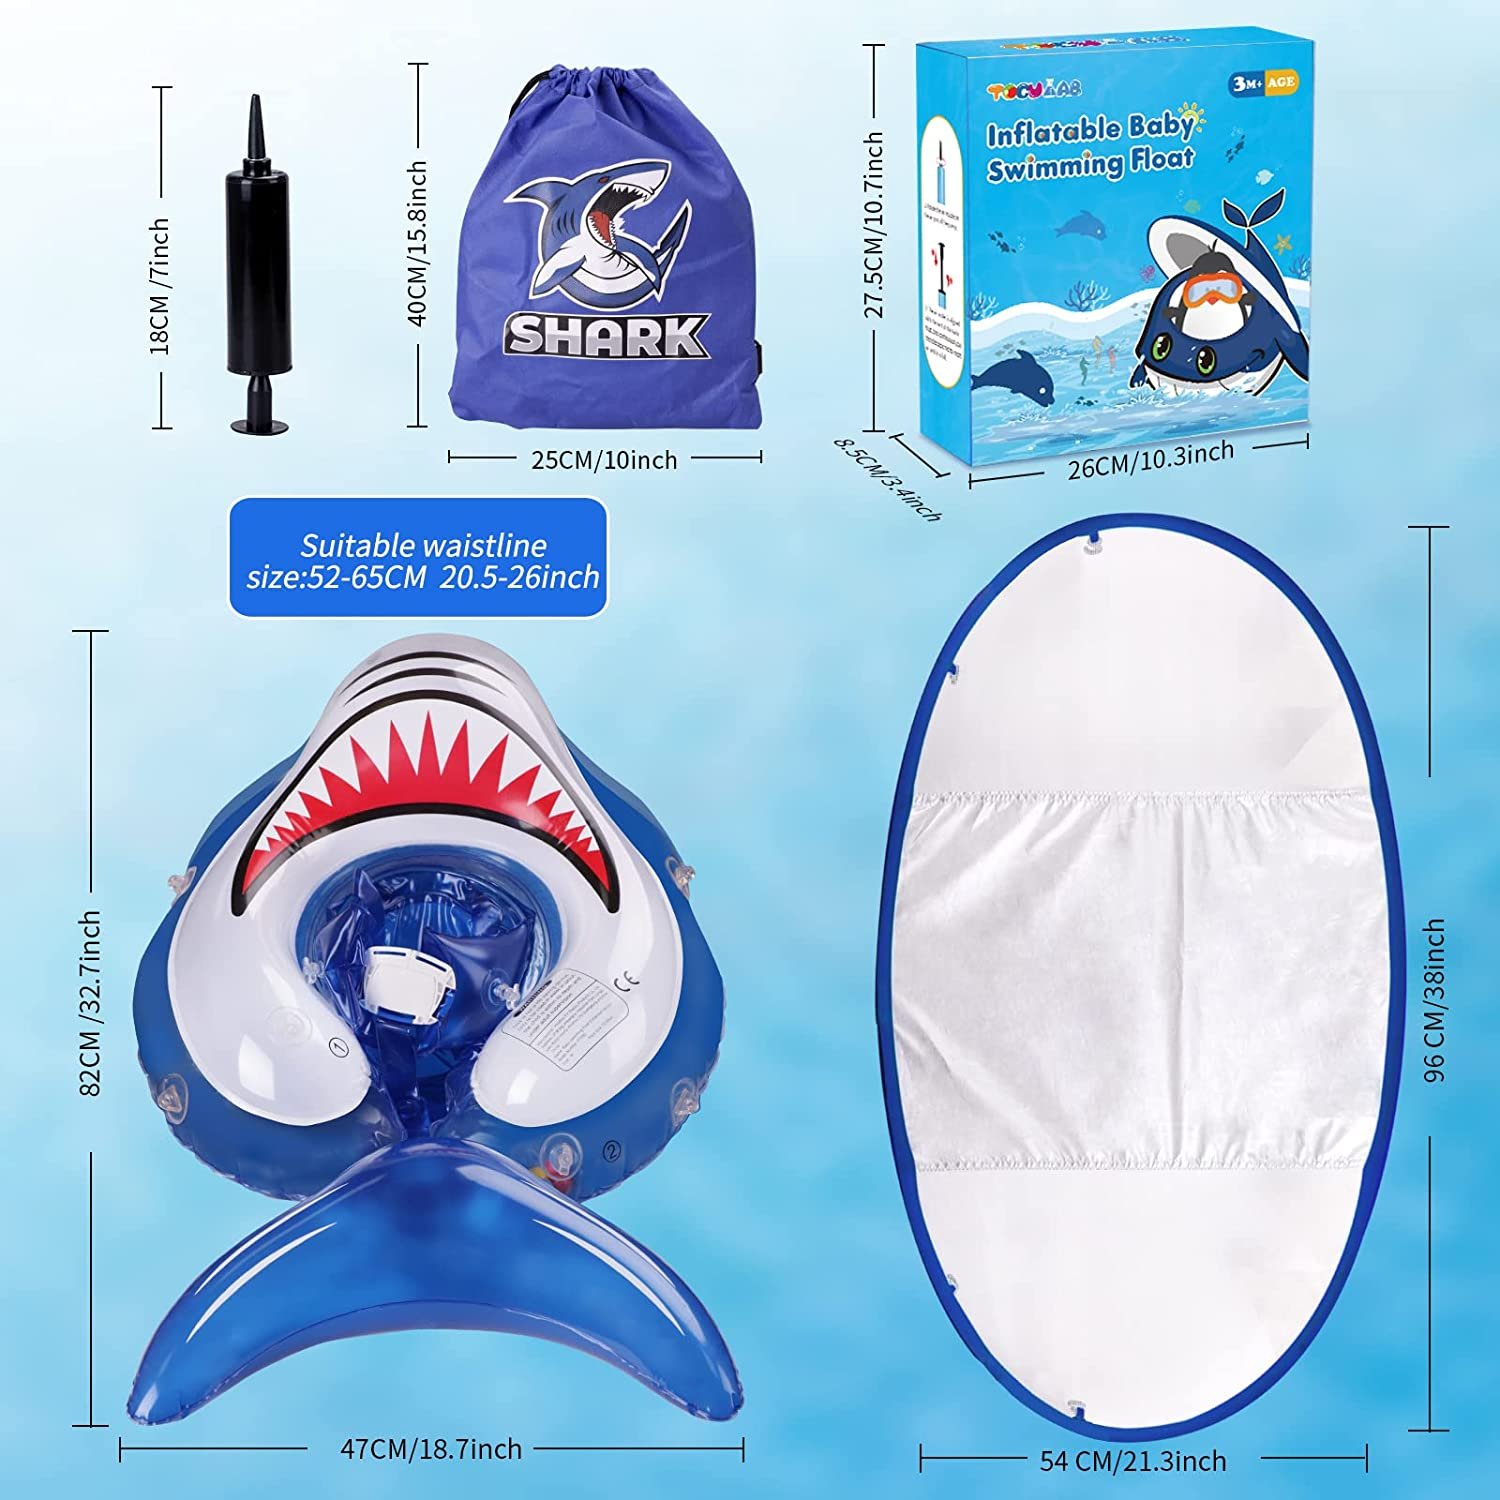 Baby Floats for Pool, with Canopy Removable SPF50+ Sun Protection